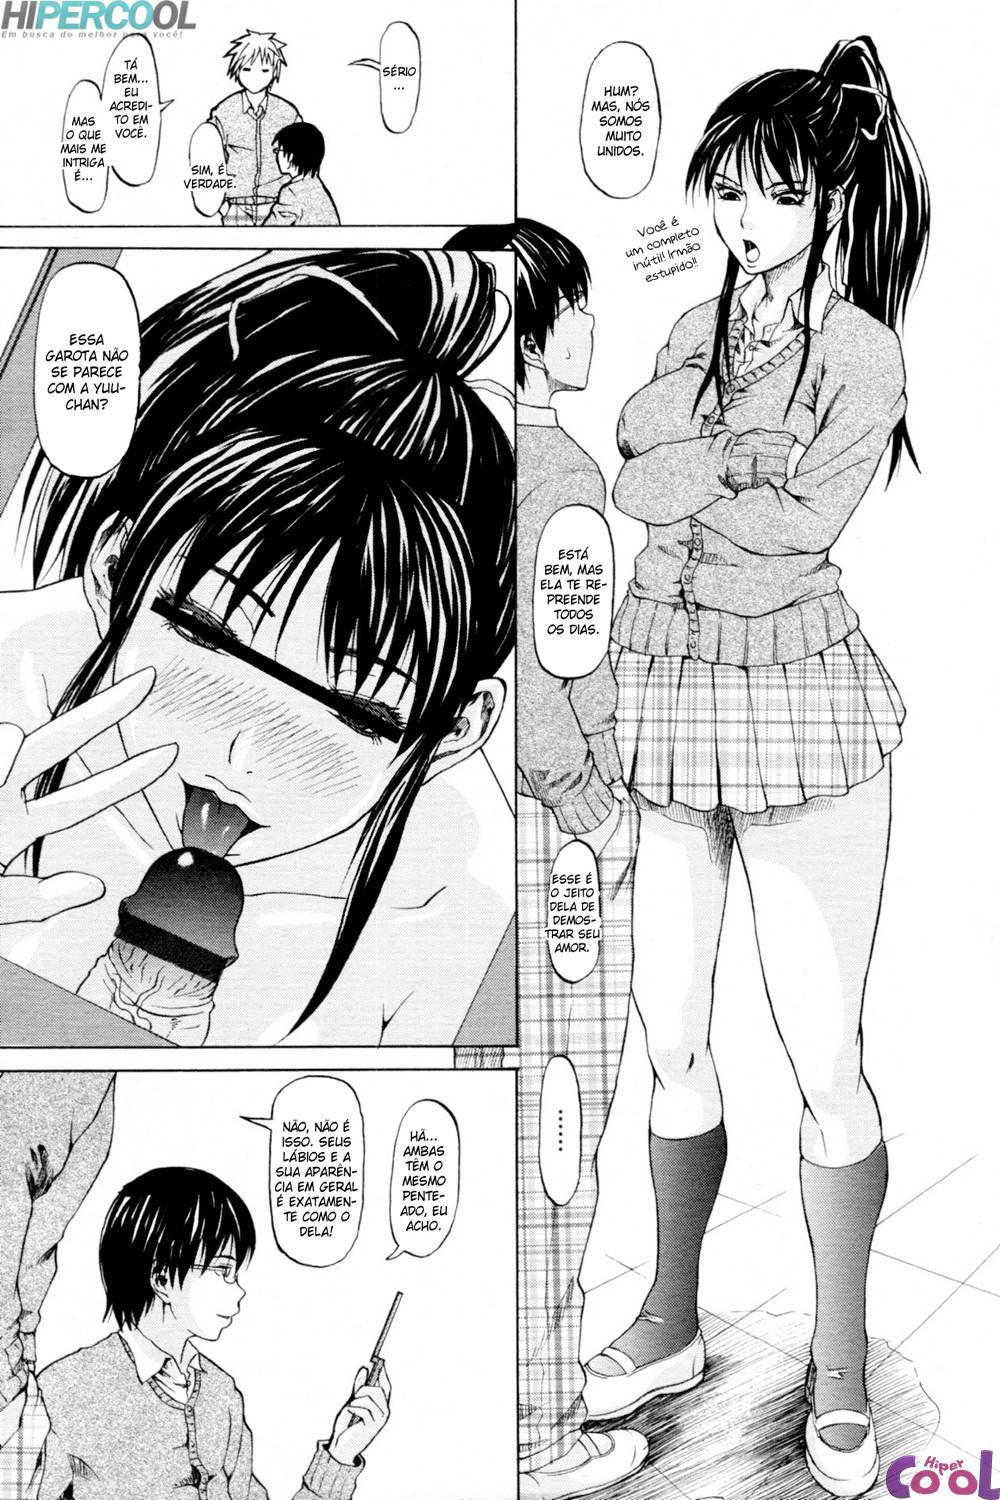 ass-m-chapter-01-page-02.jpg